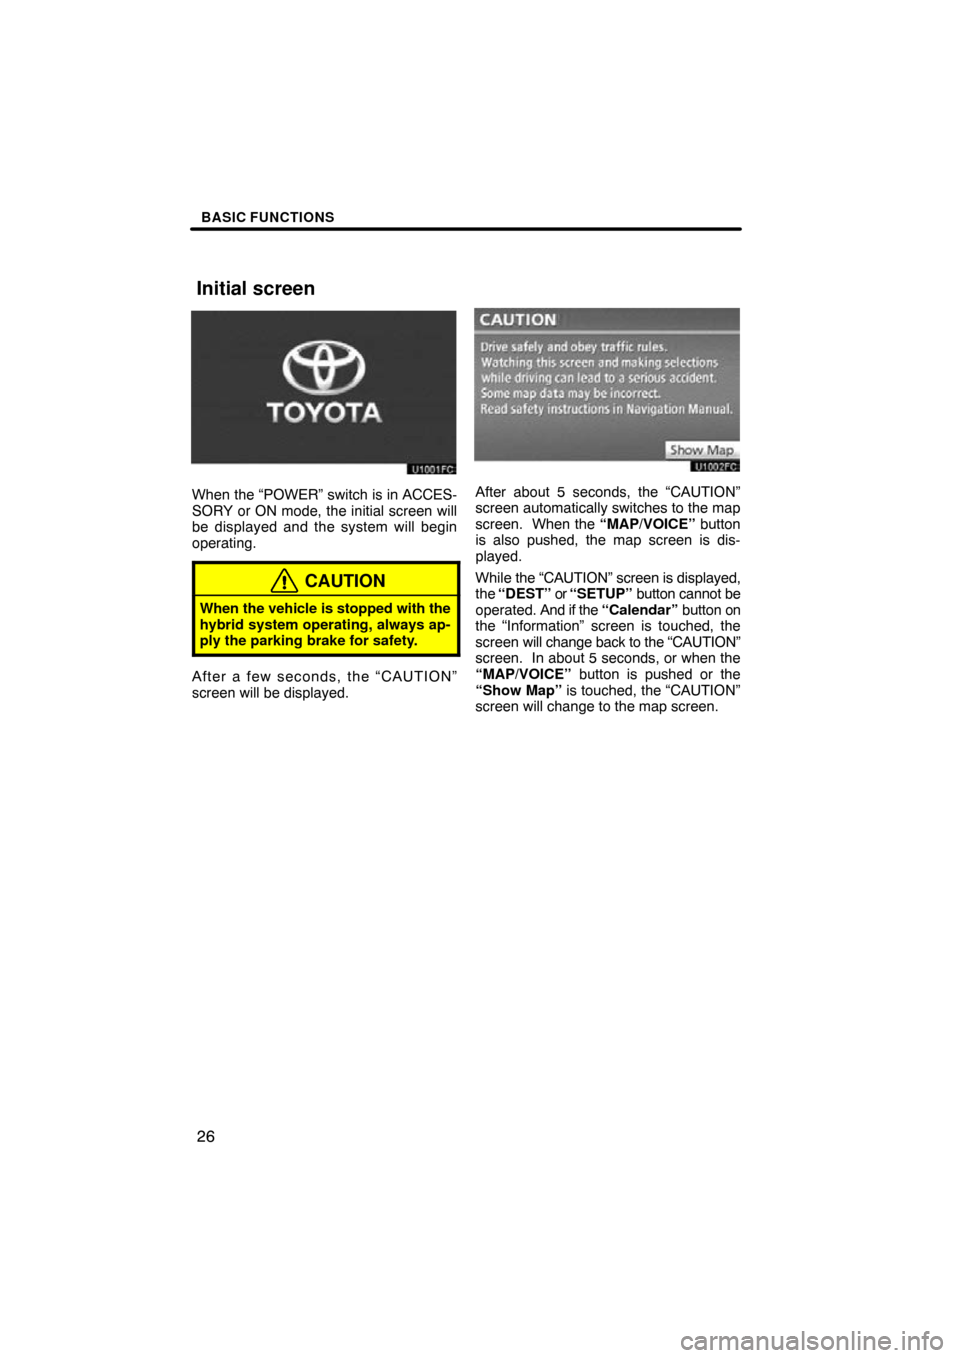 TOYOTA PRIUS 2010 3.G Navigation Manual BASIC FUNCTIONS
26
When the “POWER” switch is in ACCES-
SORY or ON mode, the initial screen will
be displayed and the system will begin
operating.
CAUTION
When the vehicle is stopped with the
hybr